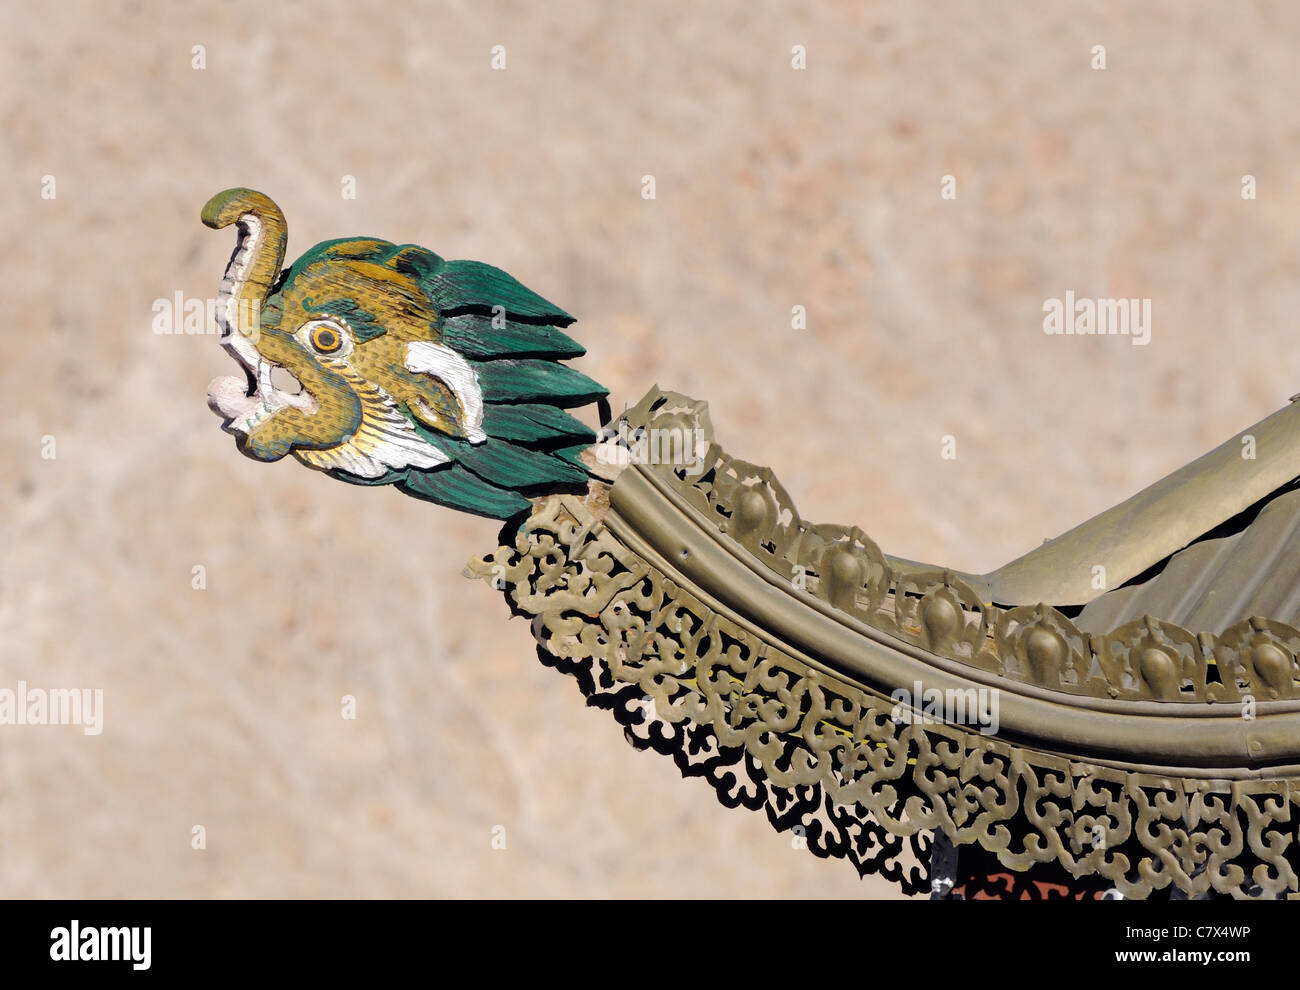 A makara, a water or sea monster, used as a finial on the roof of a building at the Shanti Stupa. Leh, Ladakh Stock Photo